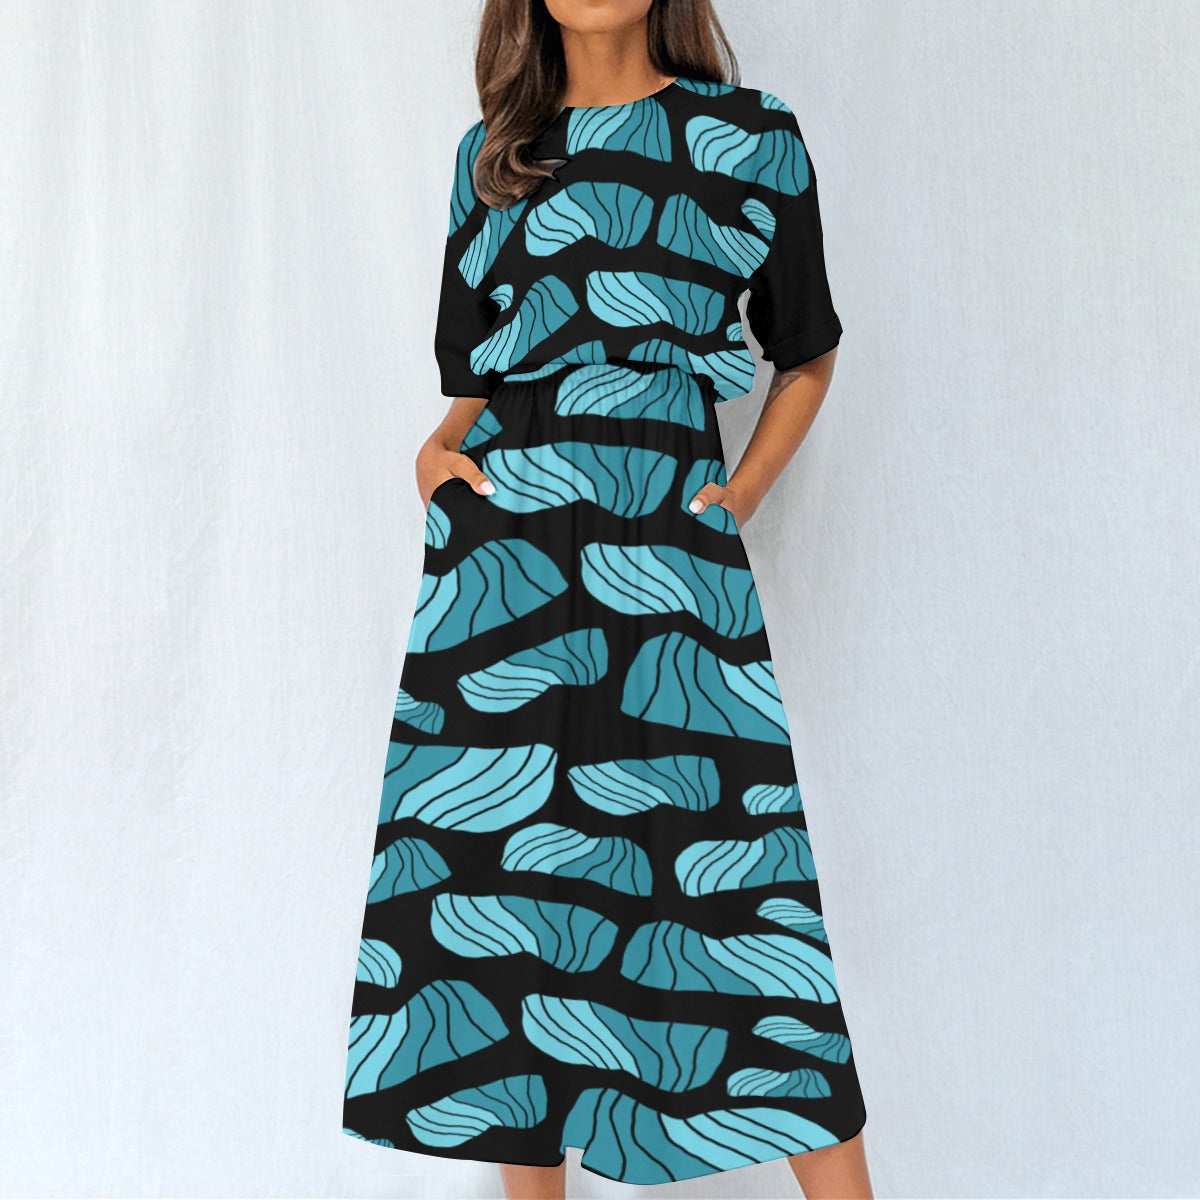 Resilience Sophistication Dress by Koori Threads